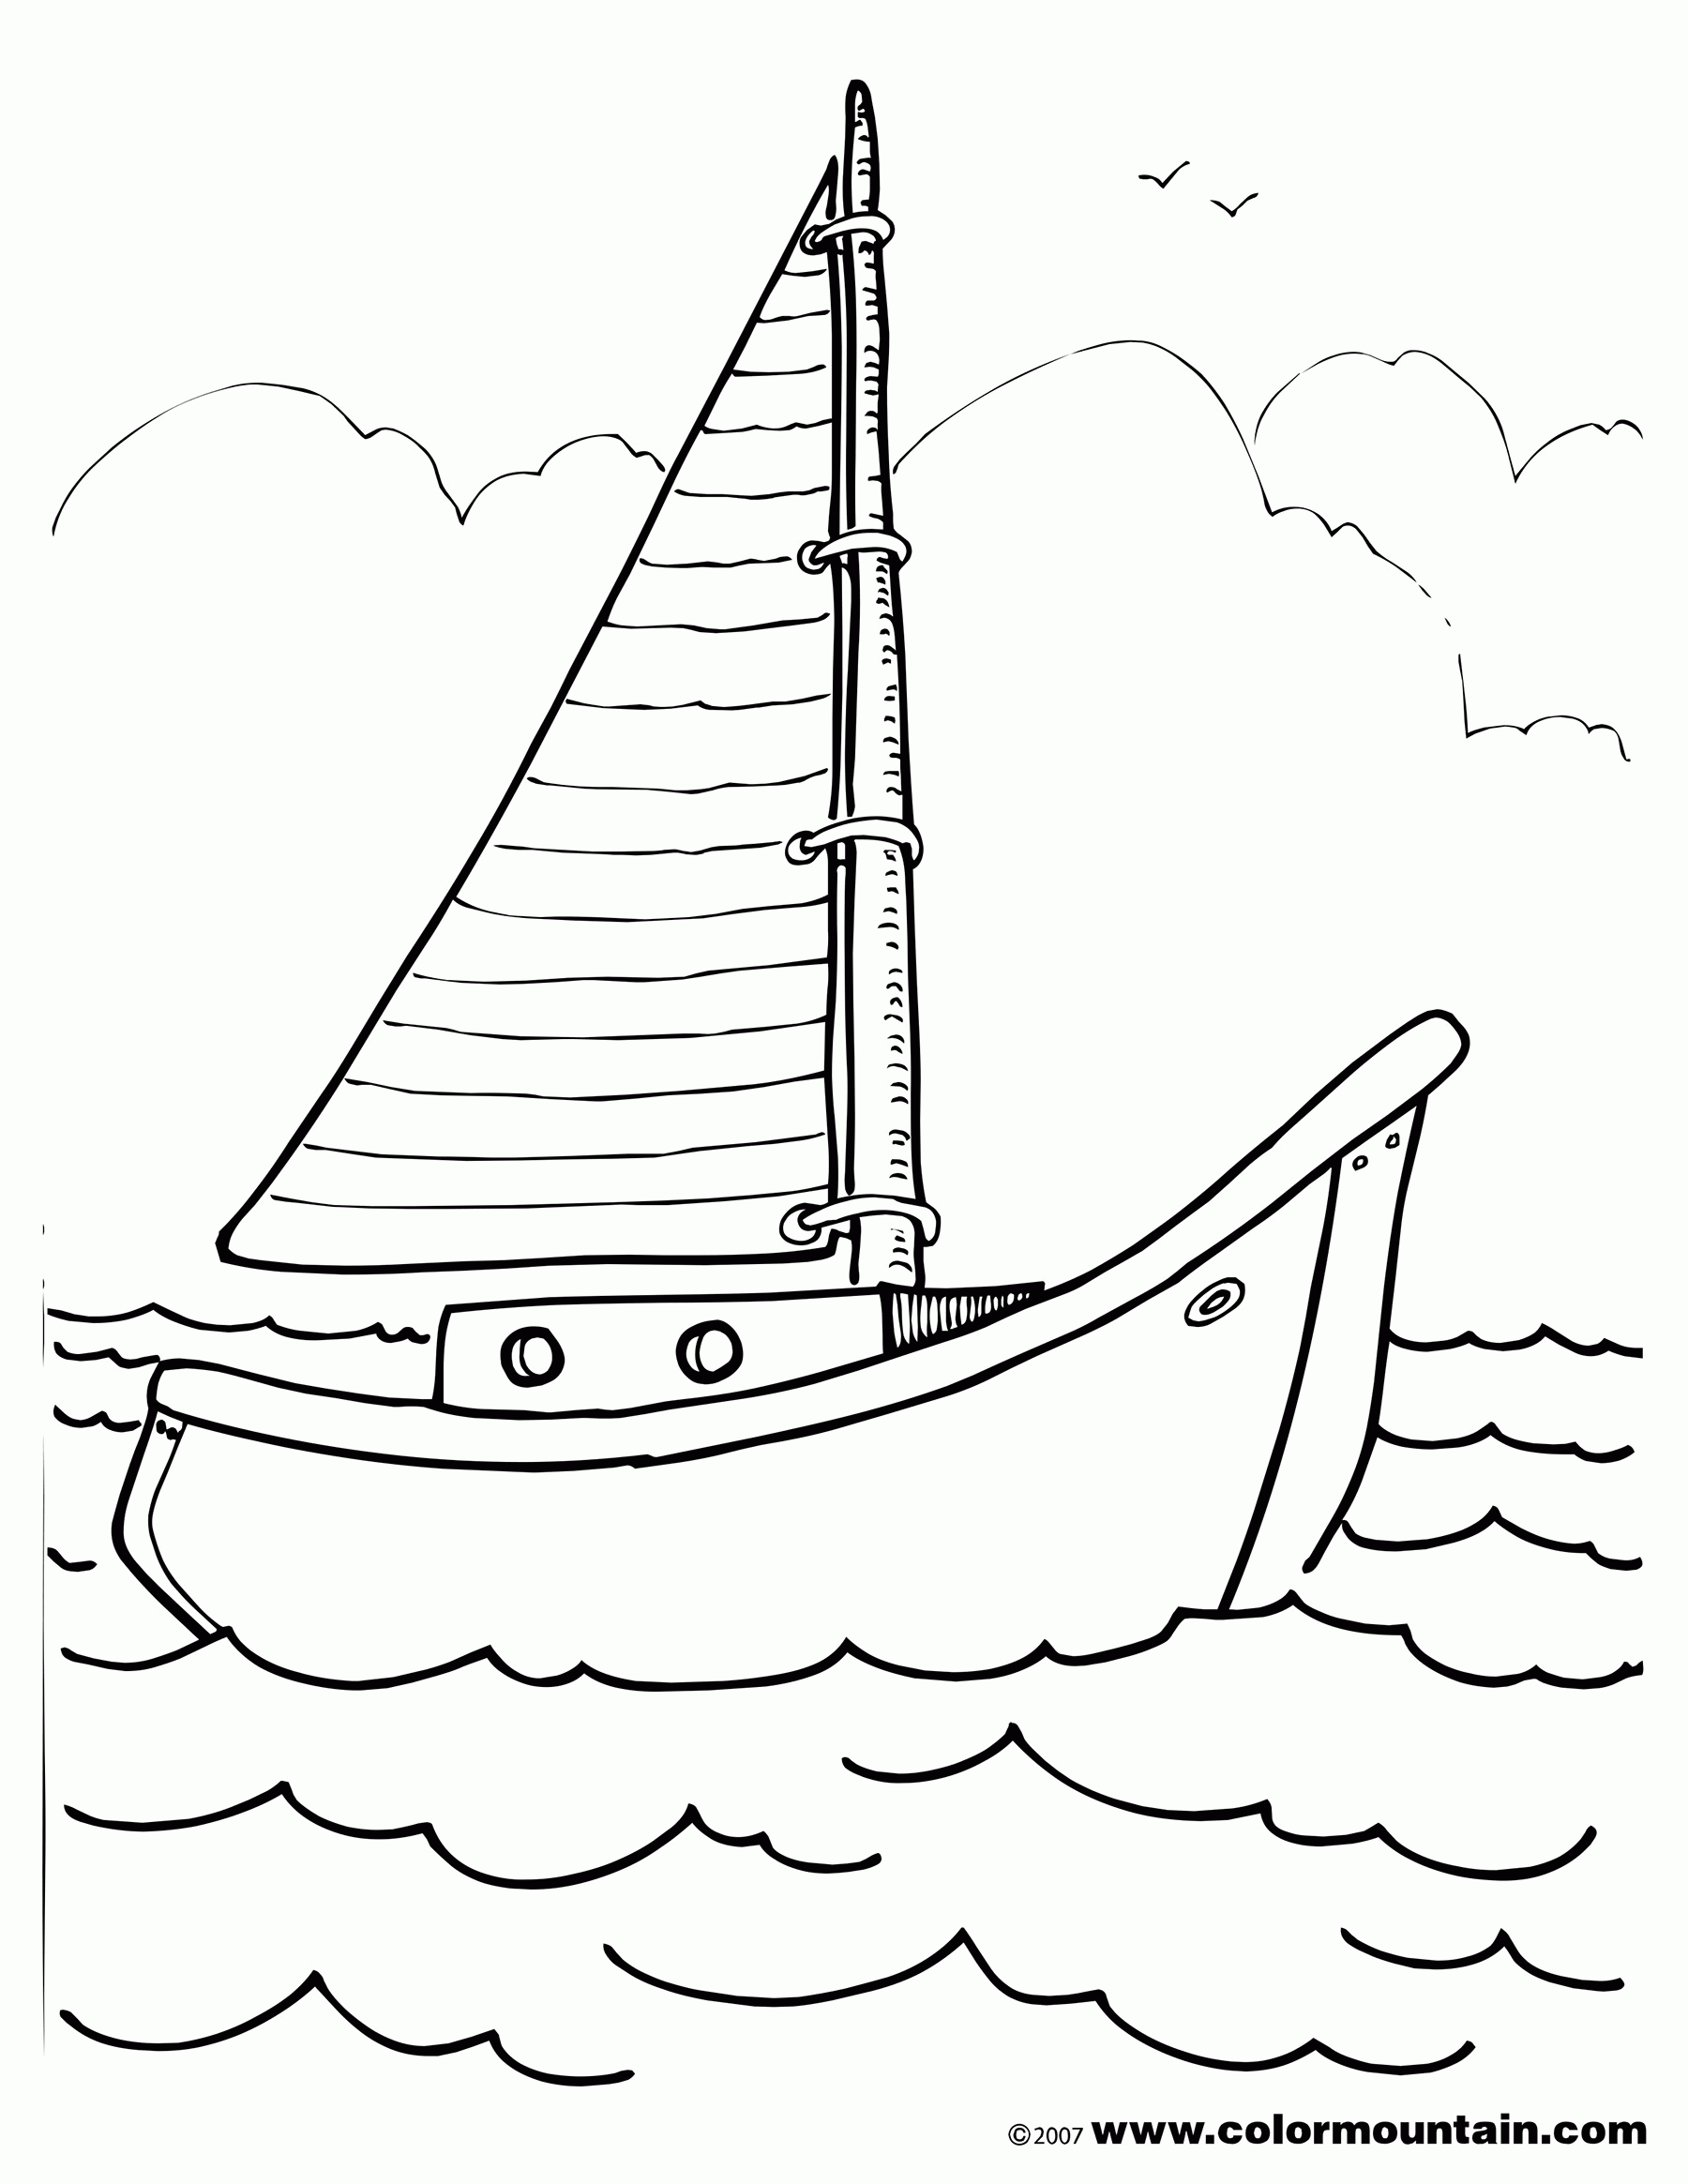 Printable Boat Coloring Pages - Printable Templates